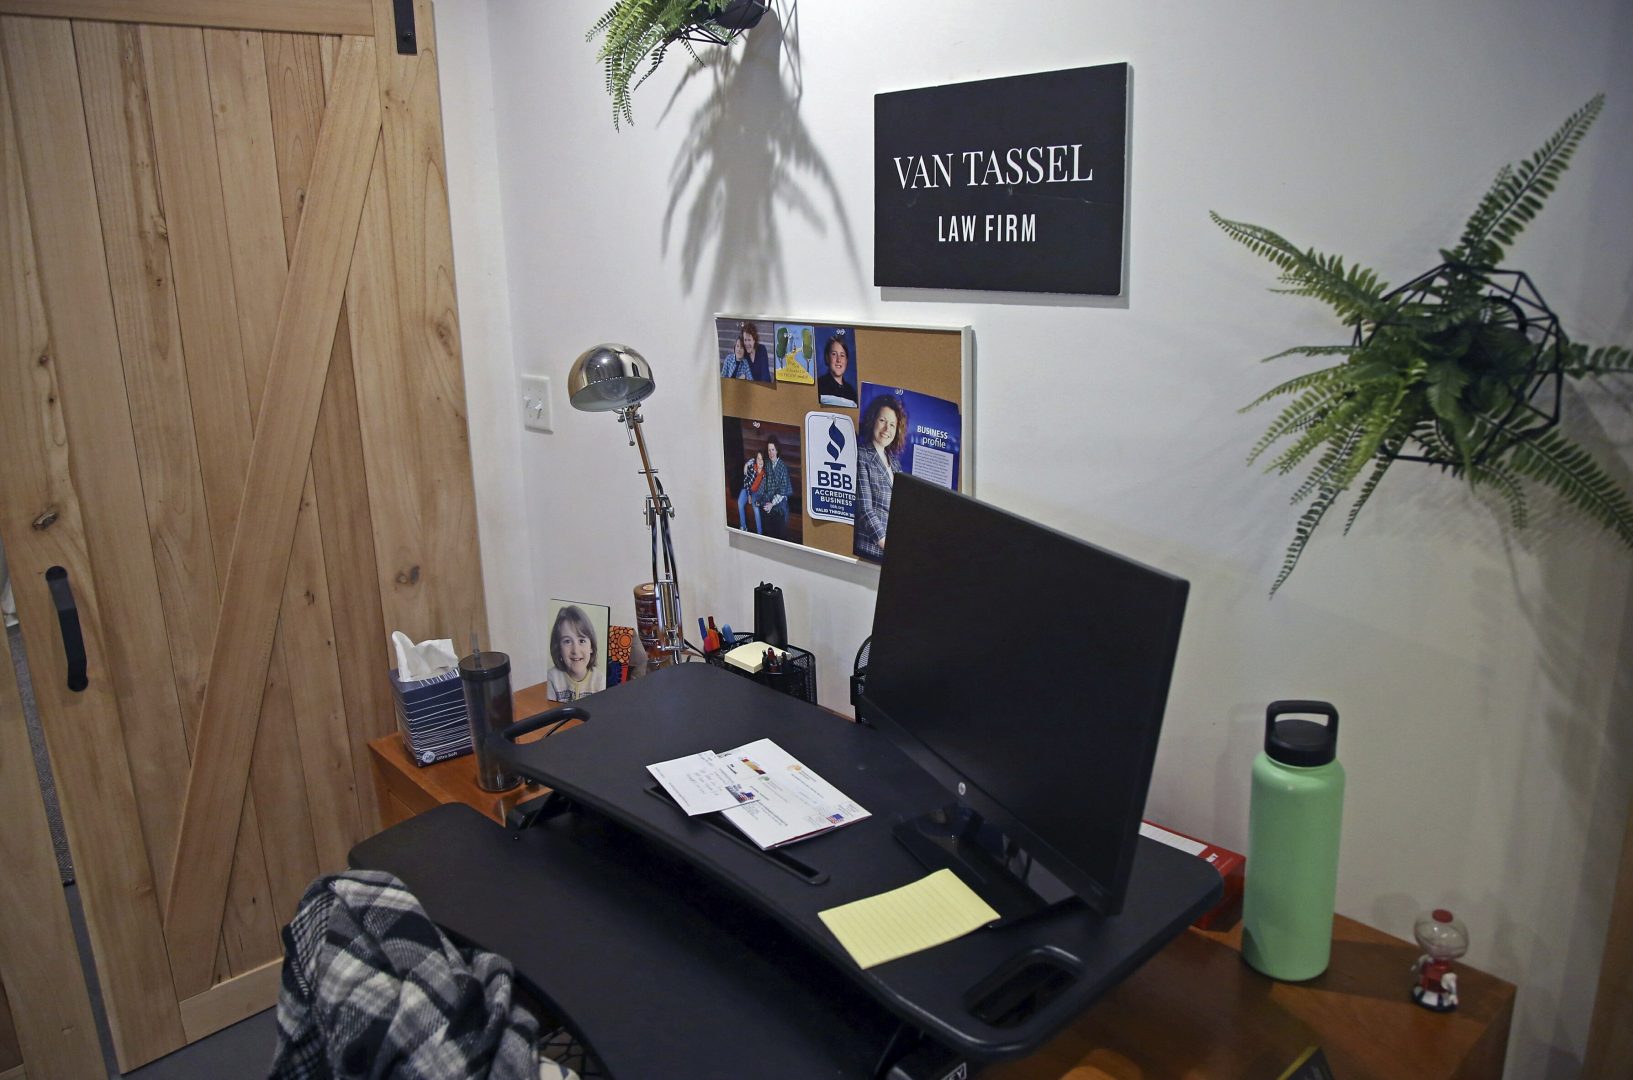 This Jan. 16, 2019 photo shows a lawyer's work space at ModernWell in Minneapolis. ModernWell is one of a growing number of women-only and women-focused workspaces around the country. While many predate the #MeToo movement, their growth has been interlinked with it as it put combating workplace harassment on the national agenda. 